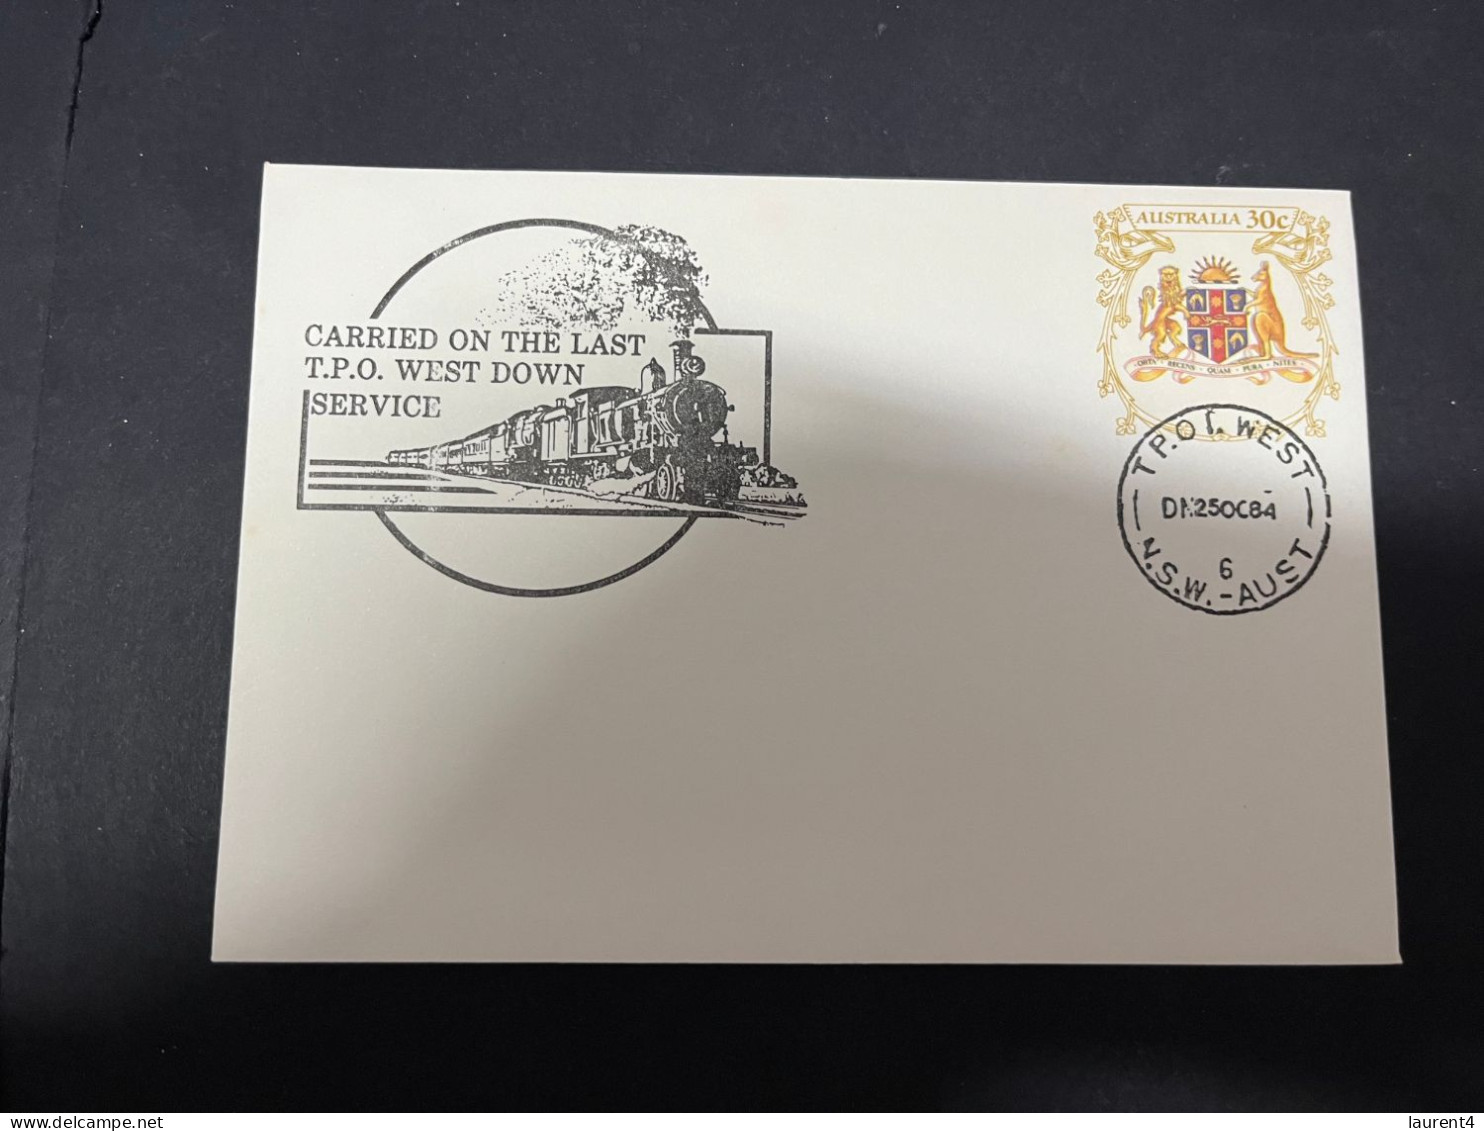 30-4-2023 (3 Z 29) Australia FDC (2 Covers) 1984 - Carried On The Last T.P.O. Service (mail Train) - Sobre Primer Día (FDC)